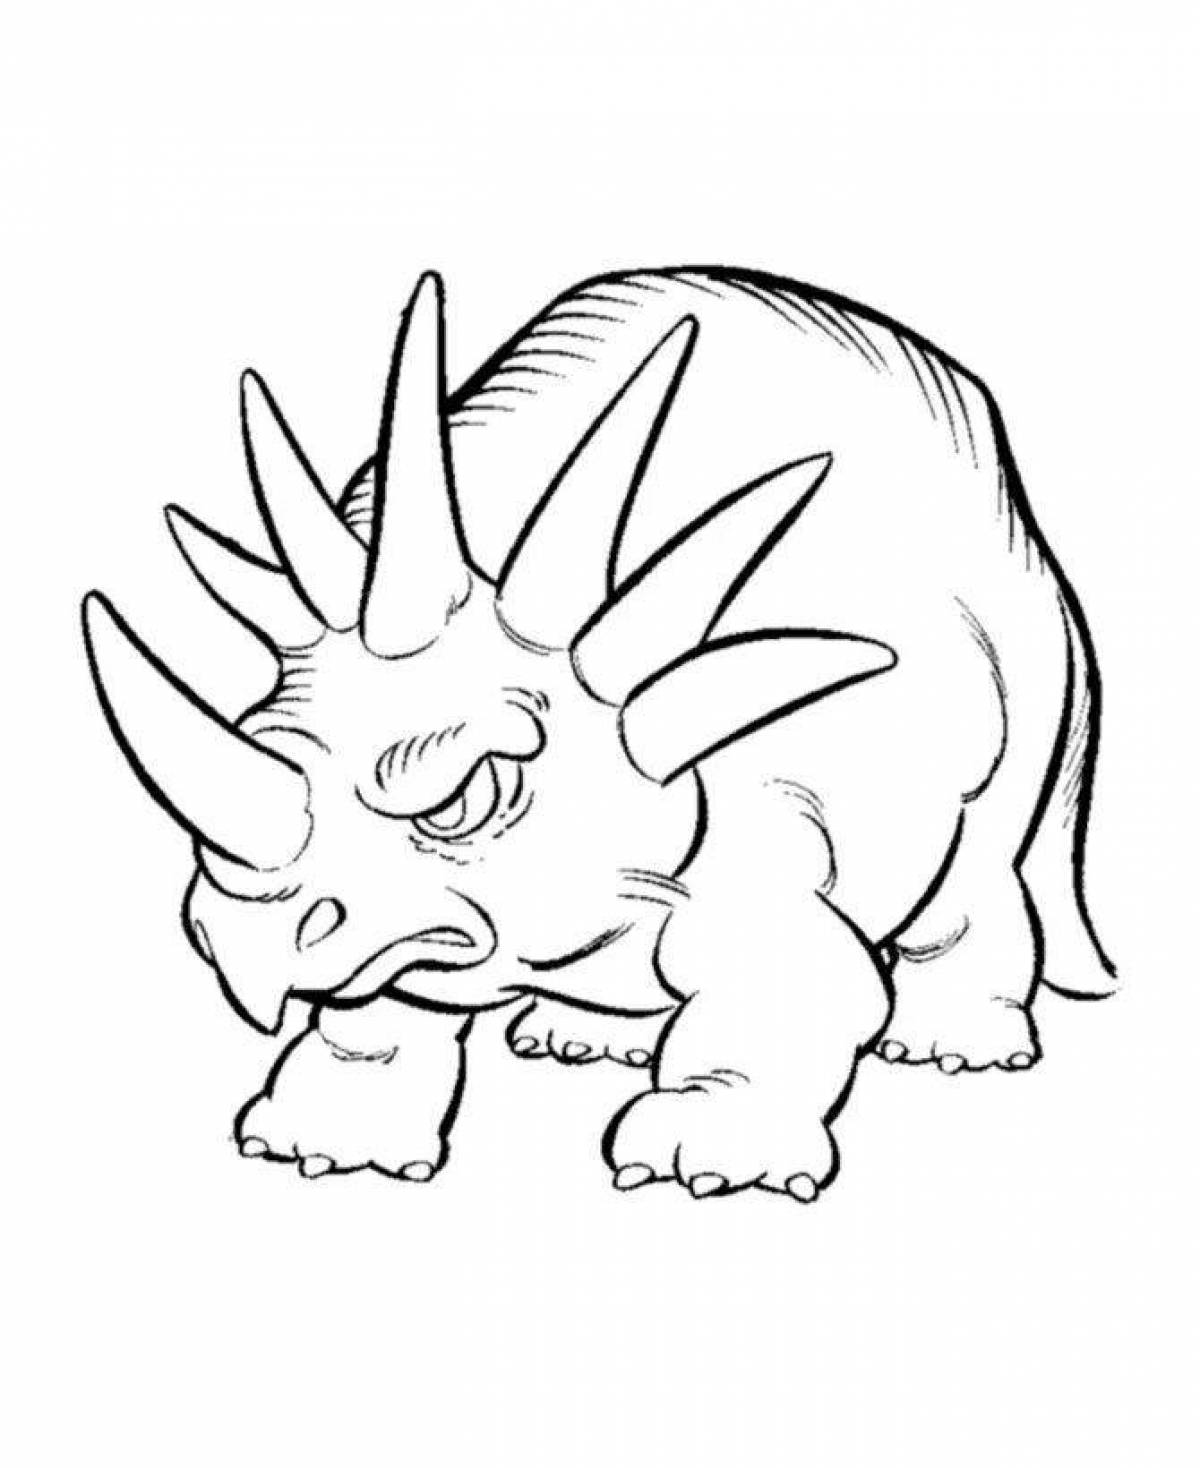 Adorable triceratops dinosaur coloring book